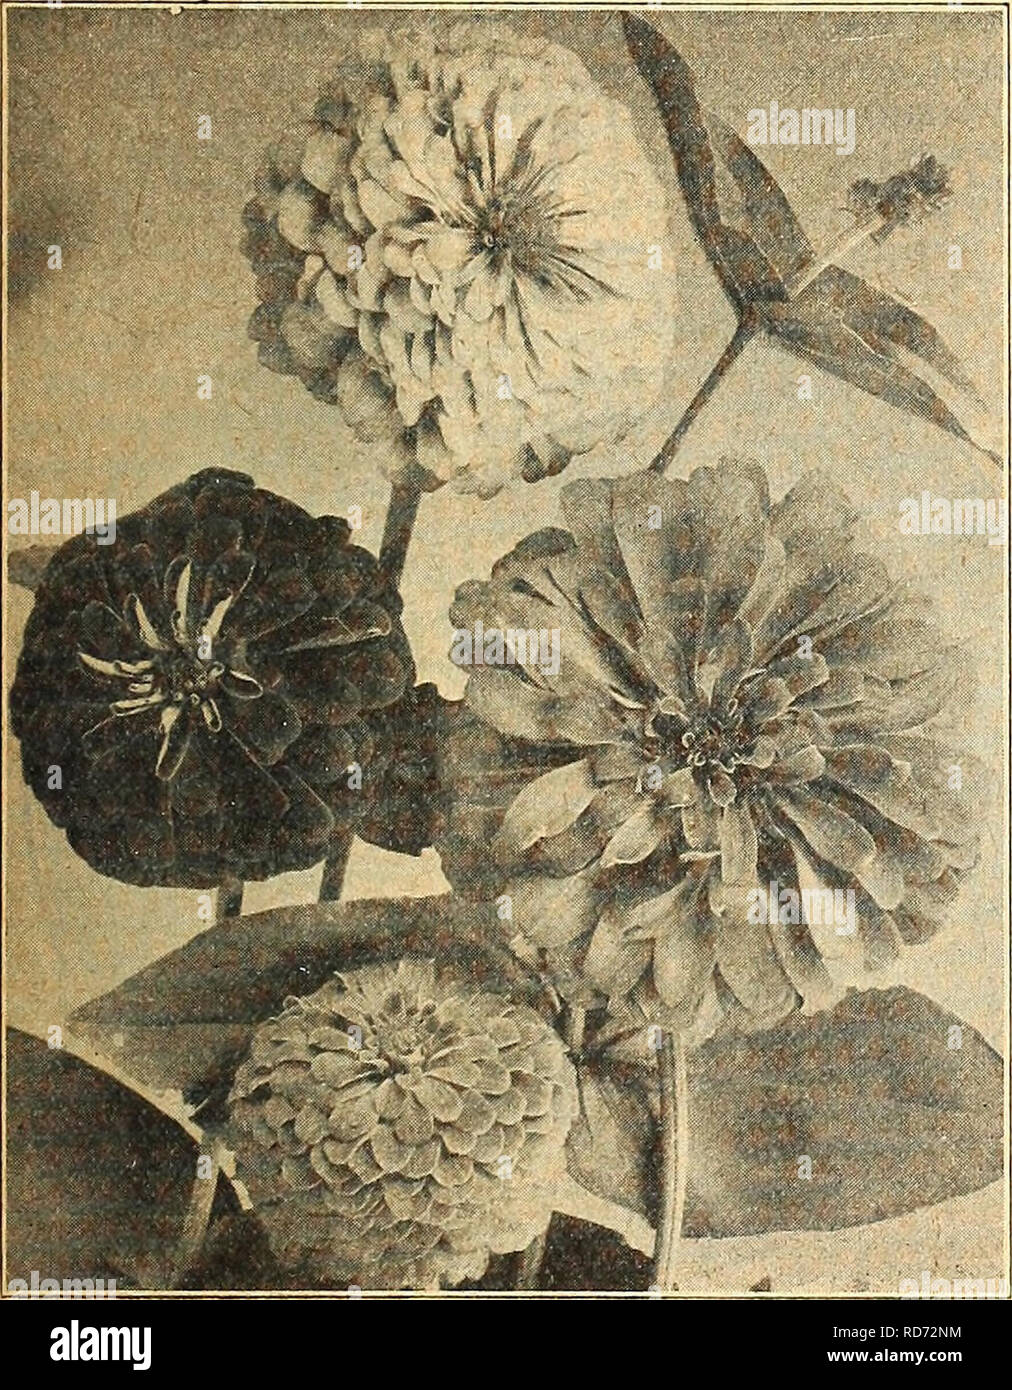 . Currie's farm and garden annual : spring 1918 43rd year. Flowers Seeds Catalogs; Bulbs (Plants) Seeds Catalogs; Vegetables Seeds Catalogs; Nurseries (Horticulture) Catalogs; Plants, Ornamental Catalogs; Gardening Equipment and supplies Catalogs. Large Flowering Zinnia. Currie's Mammoth Verbena. WALLFLOWER. A plant much esteemed for its rich, fragrant flowers. H. H. P. Pkt. Double—Finest Mixed 10 Single—Mixed 5 Blood Red—Single.... 5 Belvoir Castle—Beautiful single, yellow.... 5 Annual Wallflower—An annual variety of the old garden favorites which if sown in spring can be had in flower by Jul Stock Photo